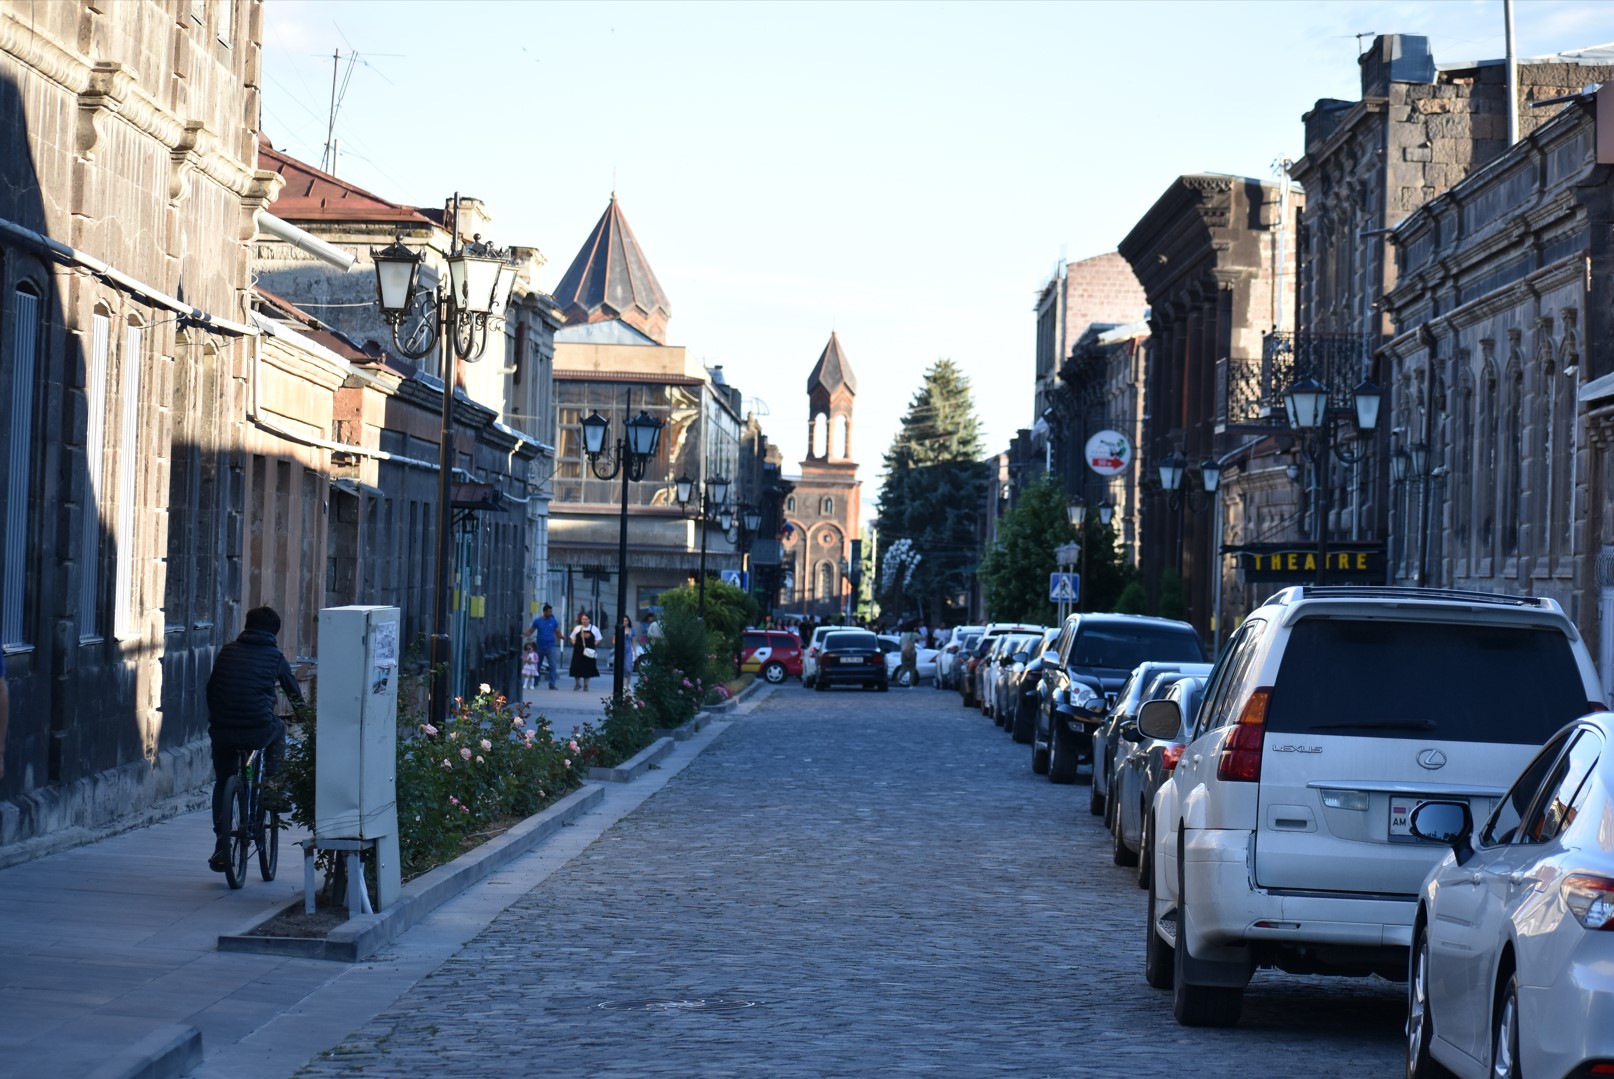 Heading to the center of Gyumri